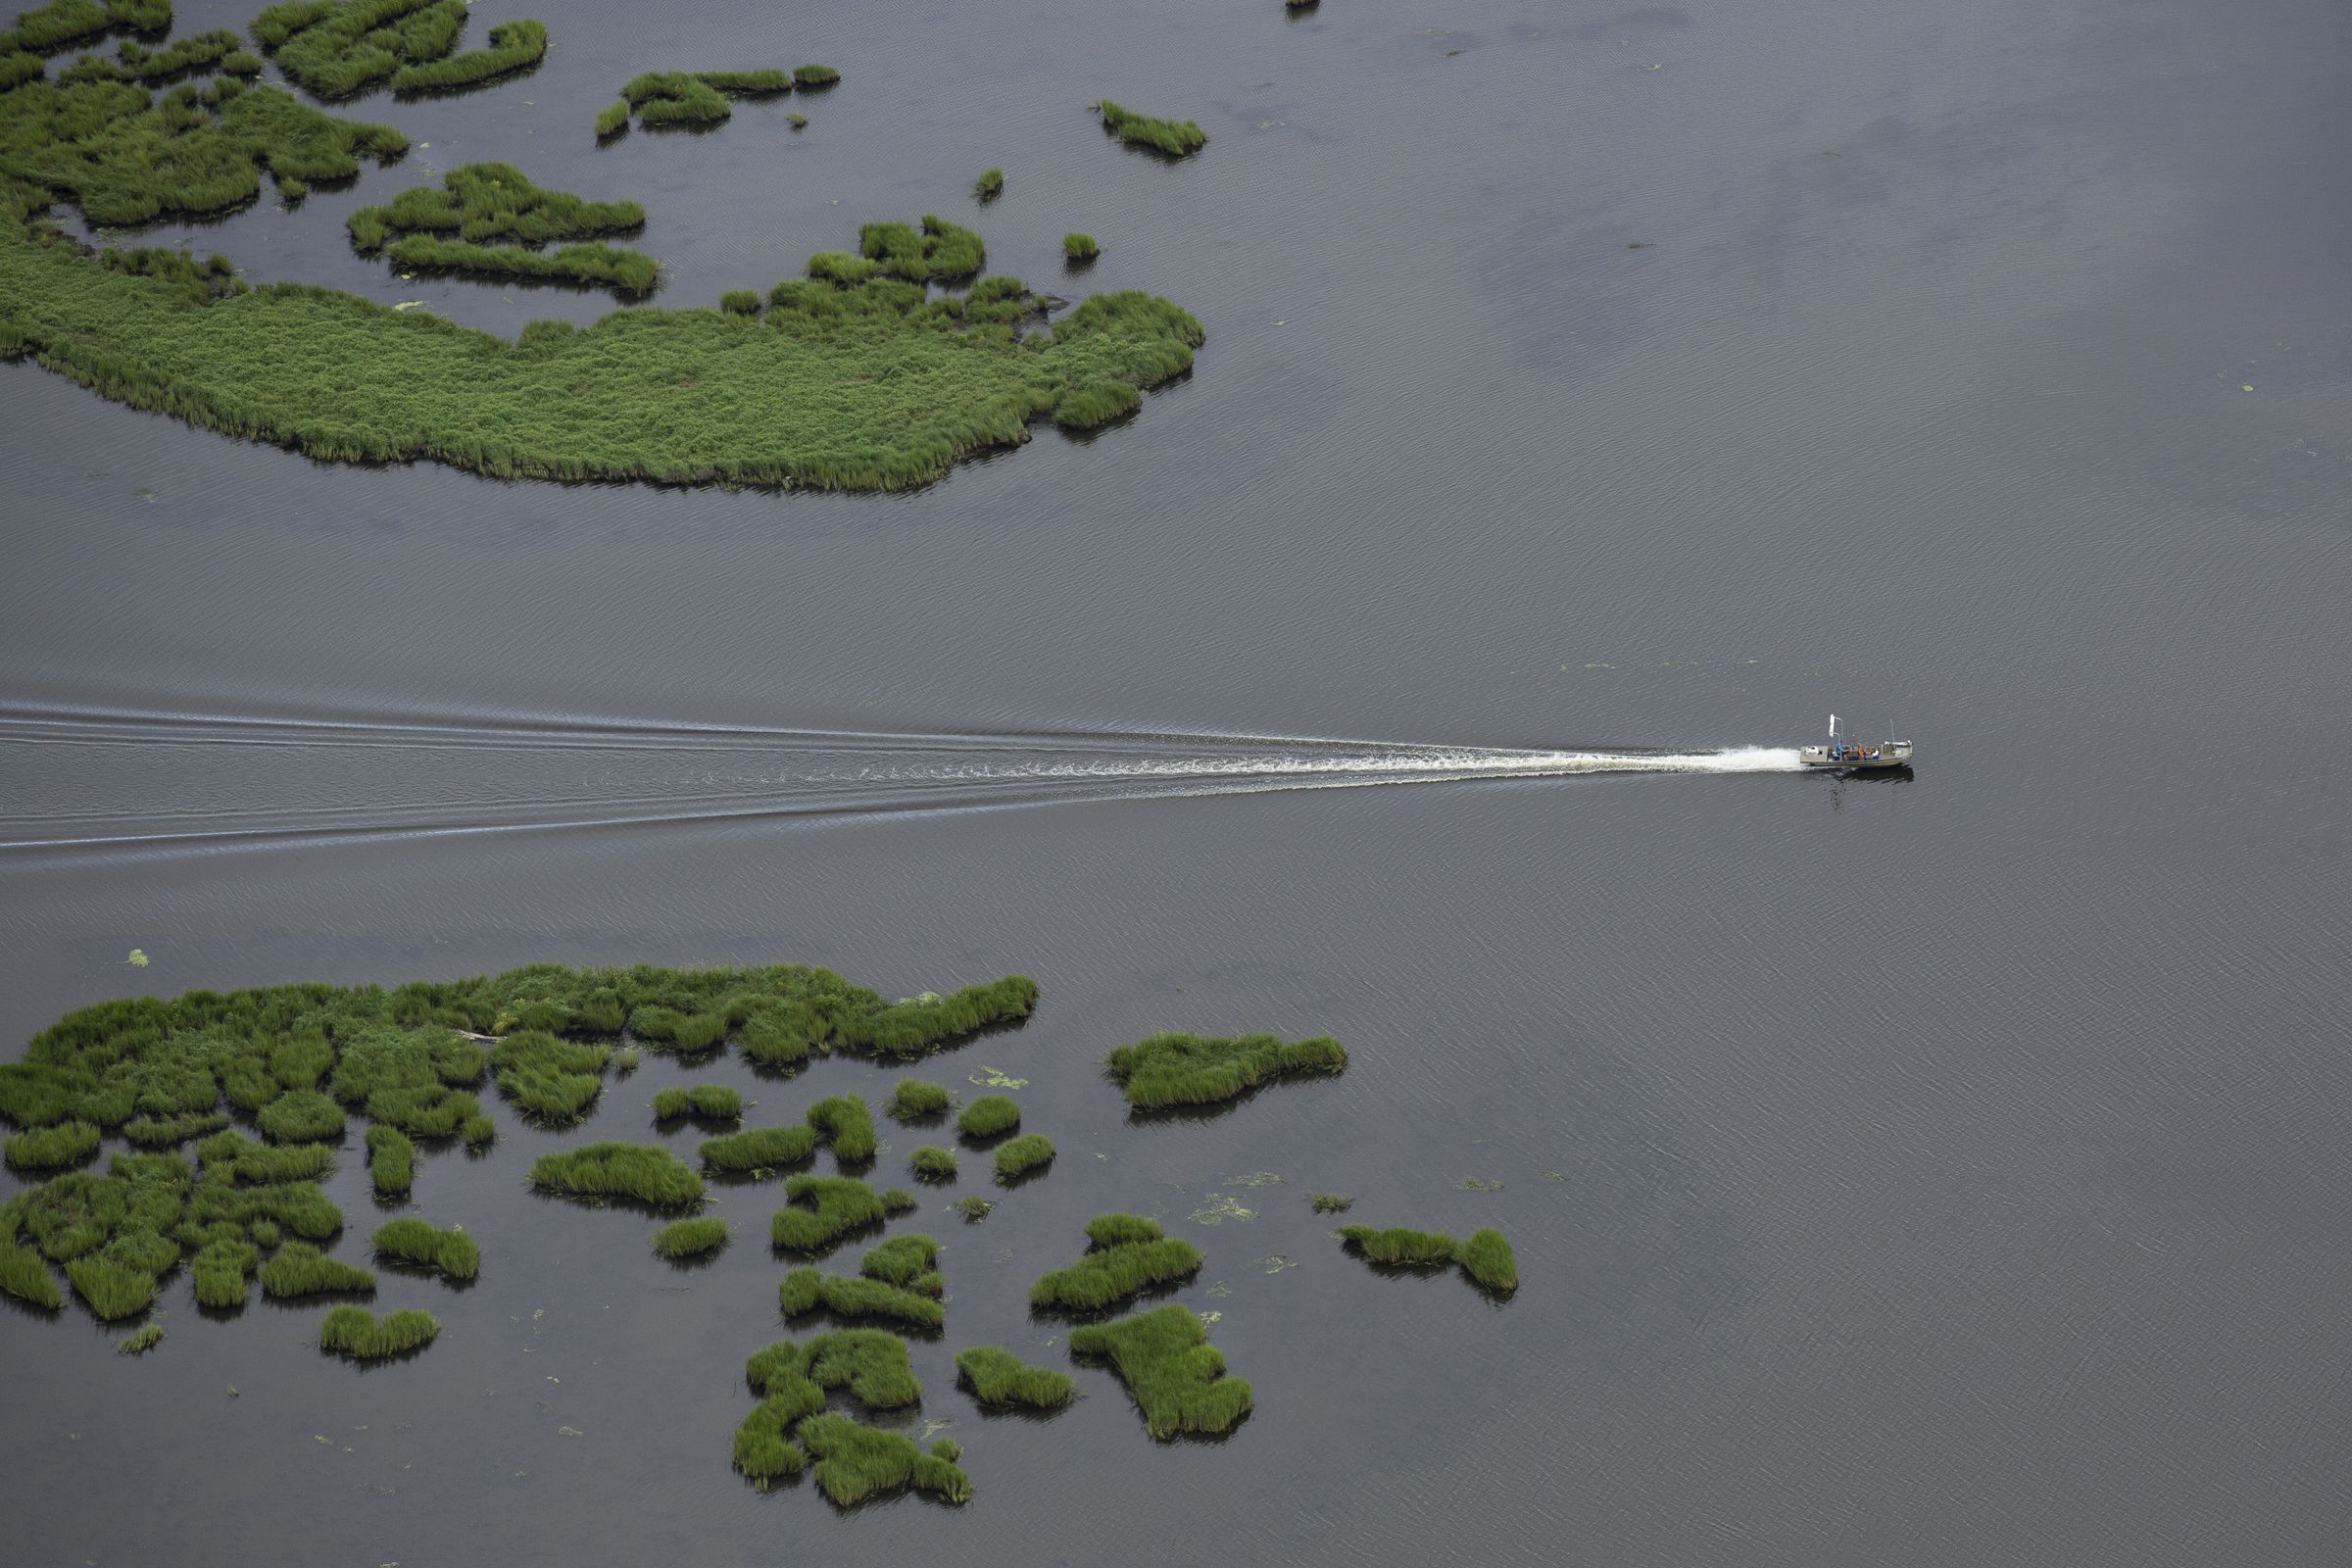 A boat moves through the marshland and water.